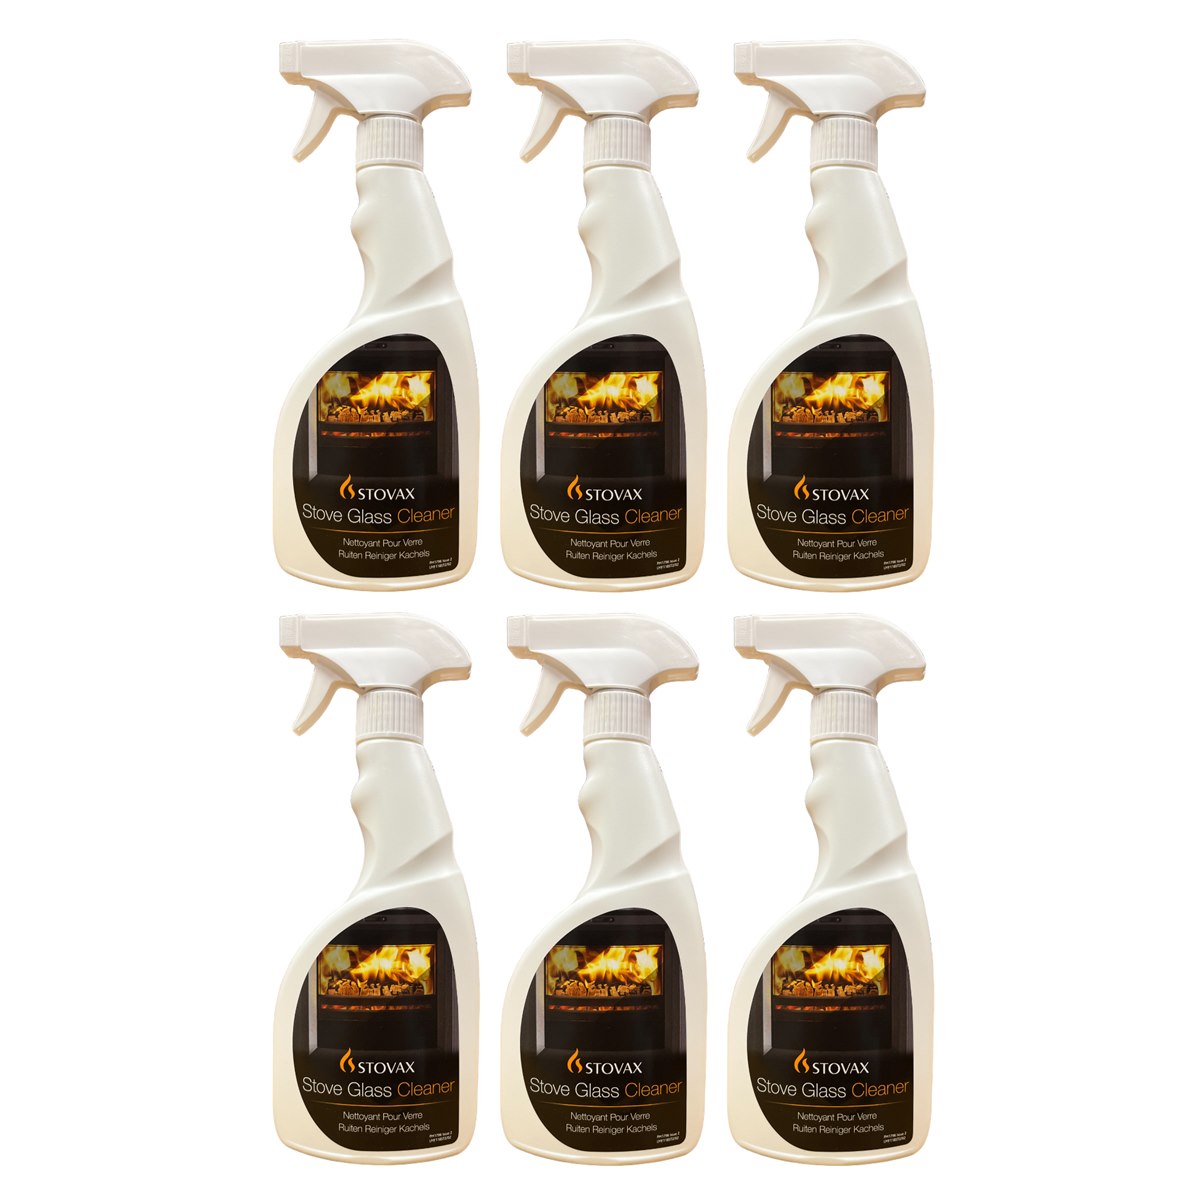 Case of 6 x Stovax Stove Glass Cleaner Spray 500ml